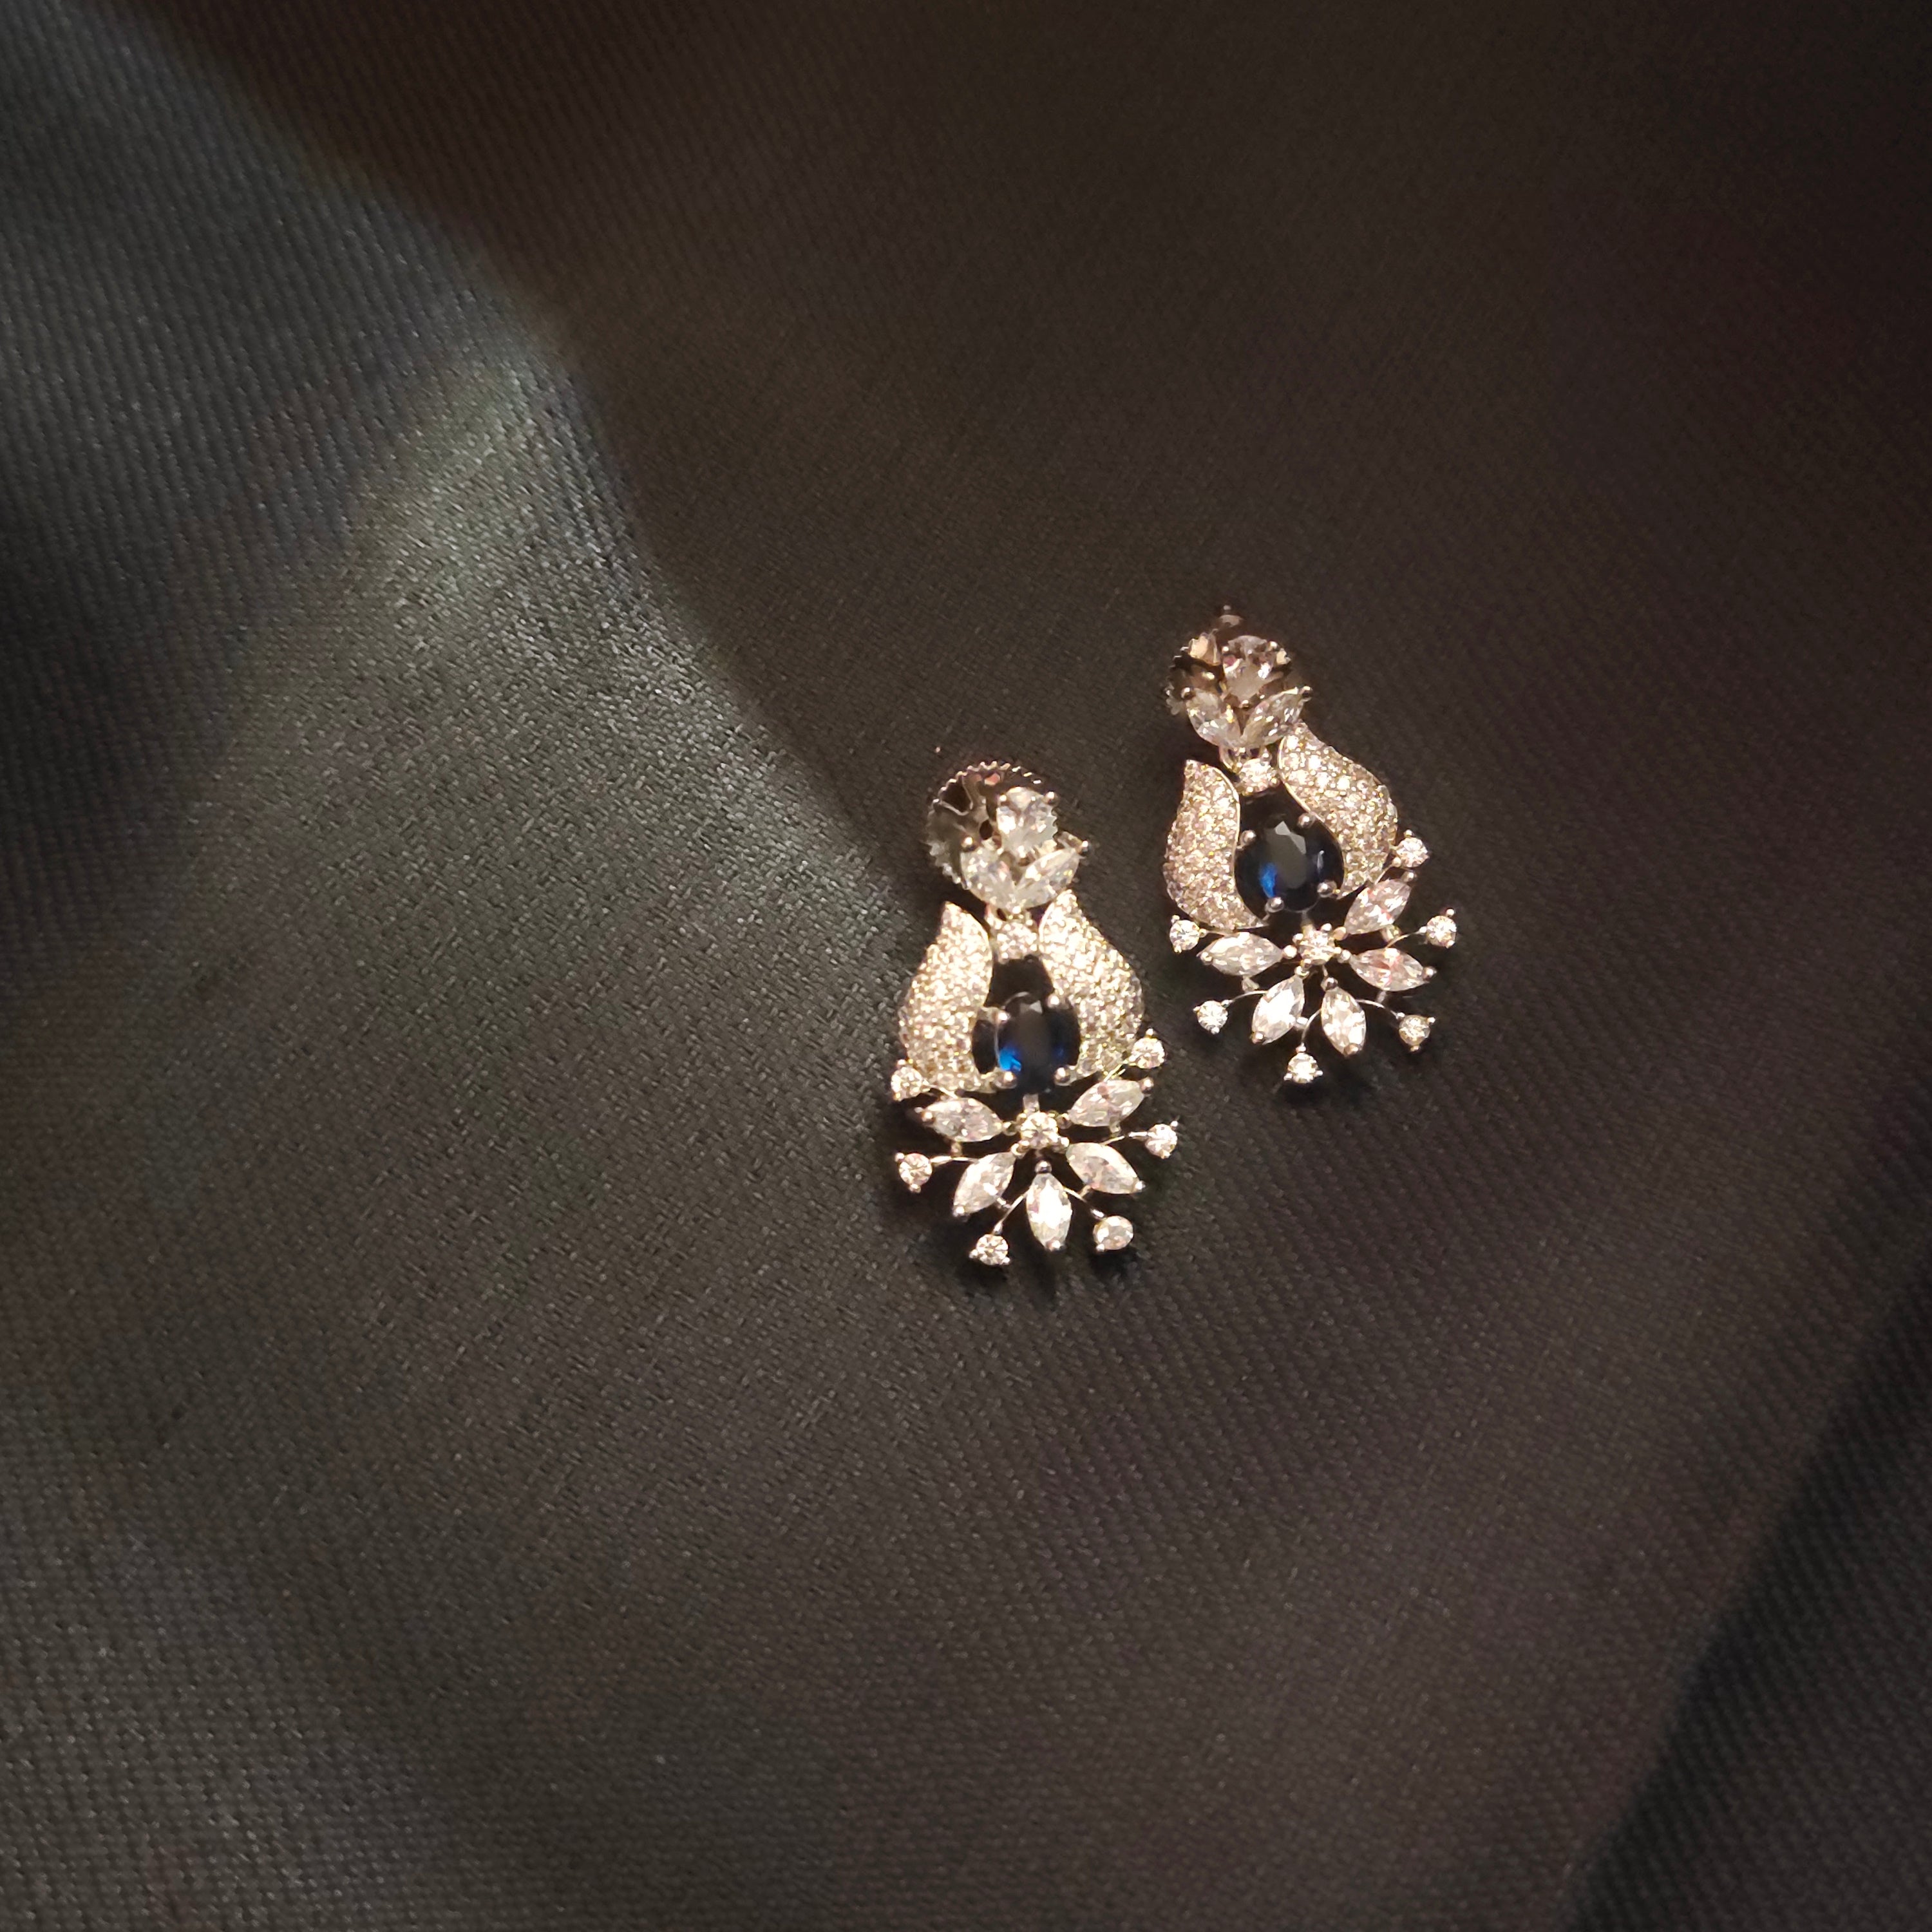 Dancing Diamonds in Motion 14kt Gold Diamond Earrings with 0.12 Carats t.w  - Jewelry Factory - North Hollywood, CA